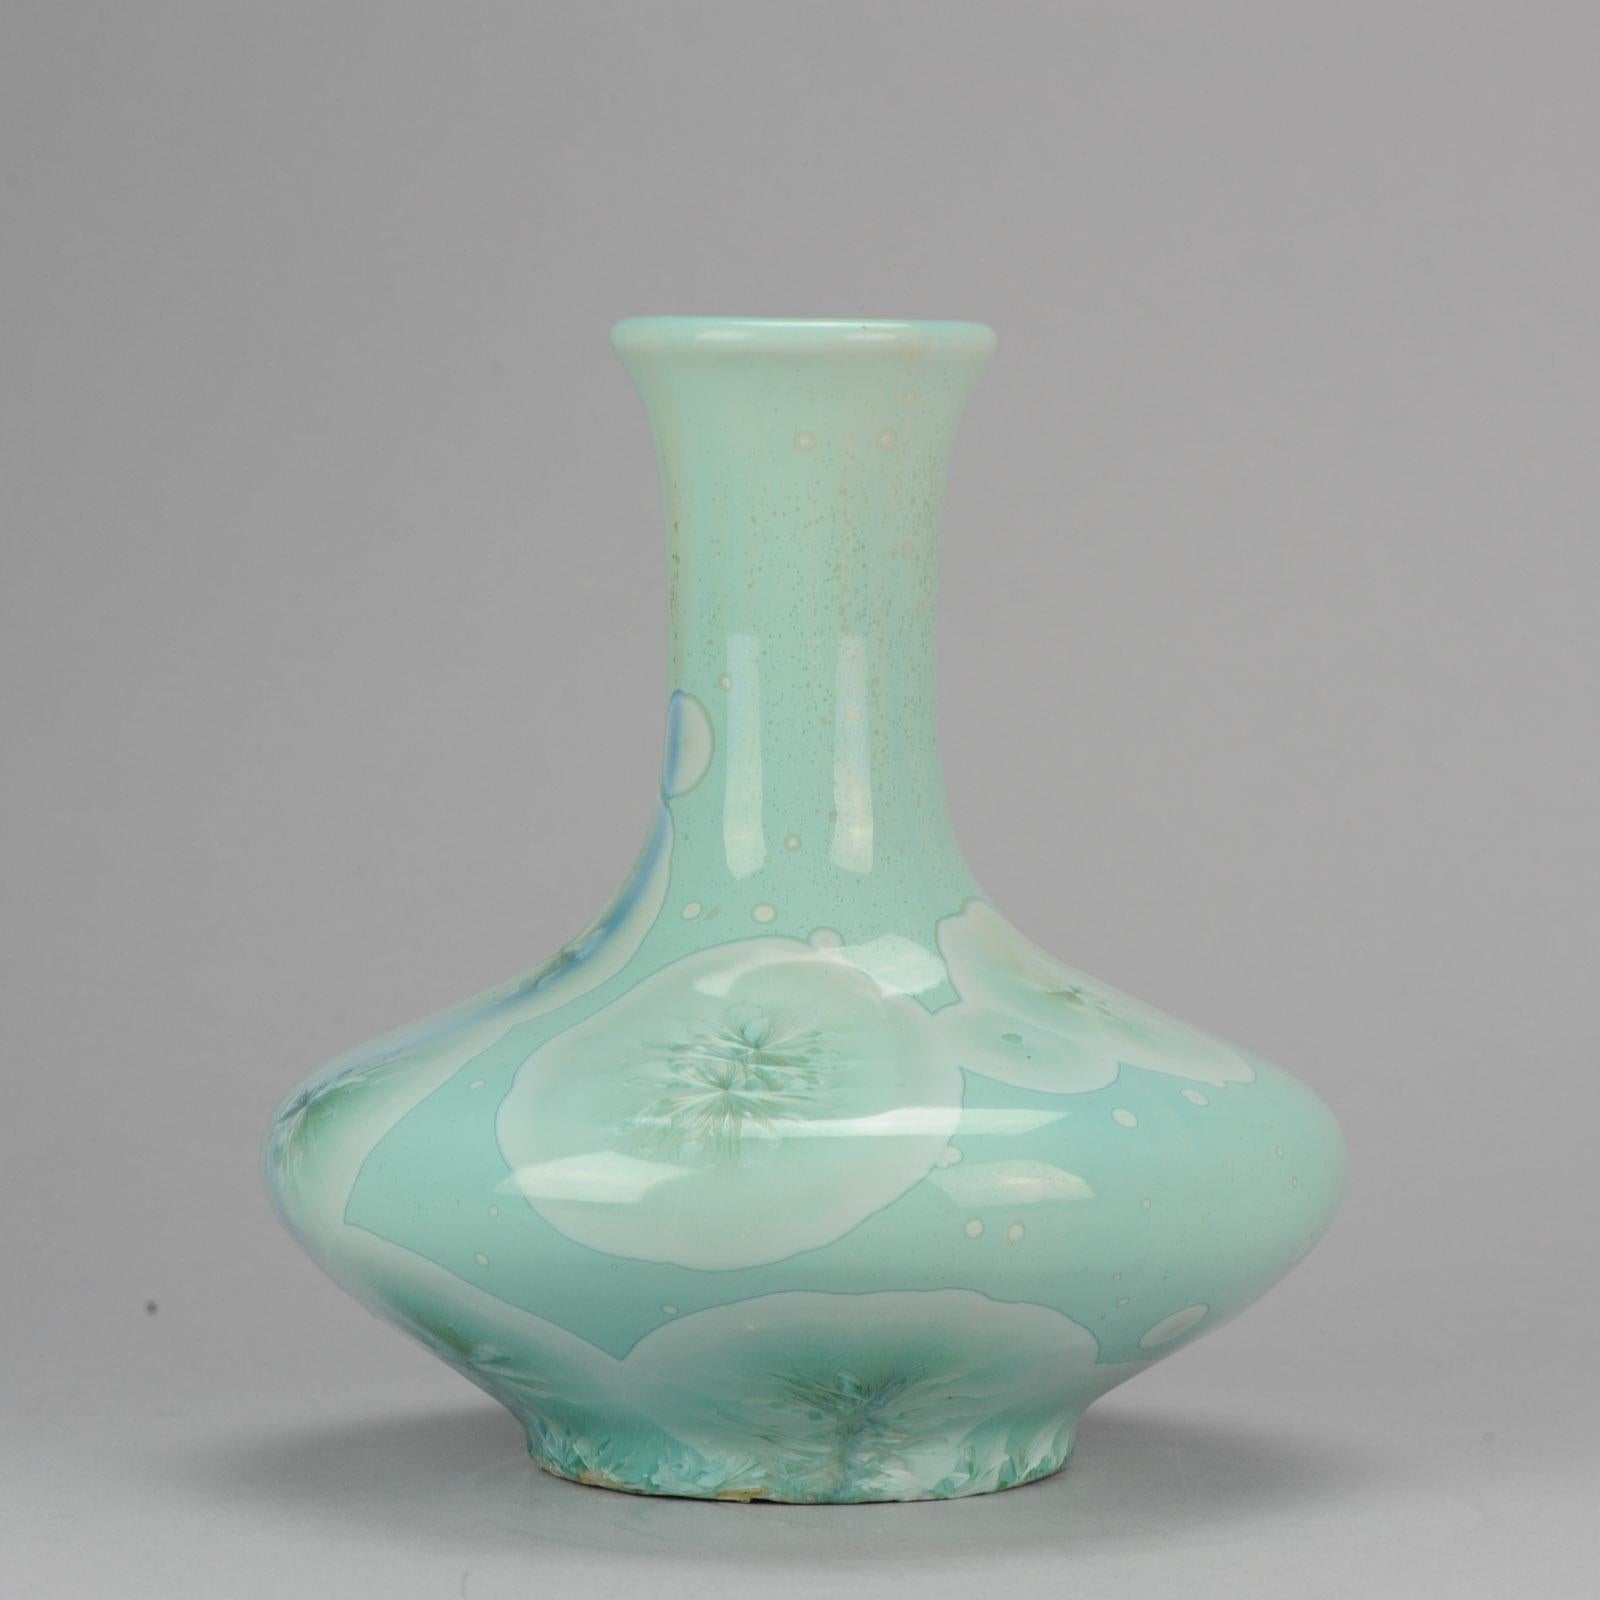 Very nice vase, high quality. Innovative crystalline glaze used in Shiwan in the 1970s-1980s. A true masterpiece. This is teh antique of the future.

Provenance: Bought in the 1980s in China. Afterwards exhibited and on loan to the Leiden Museum